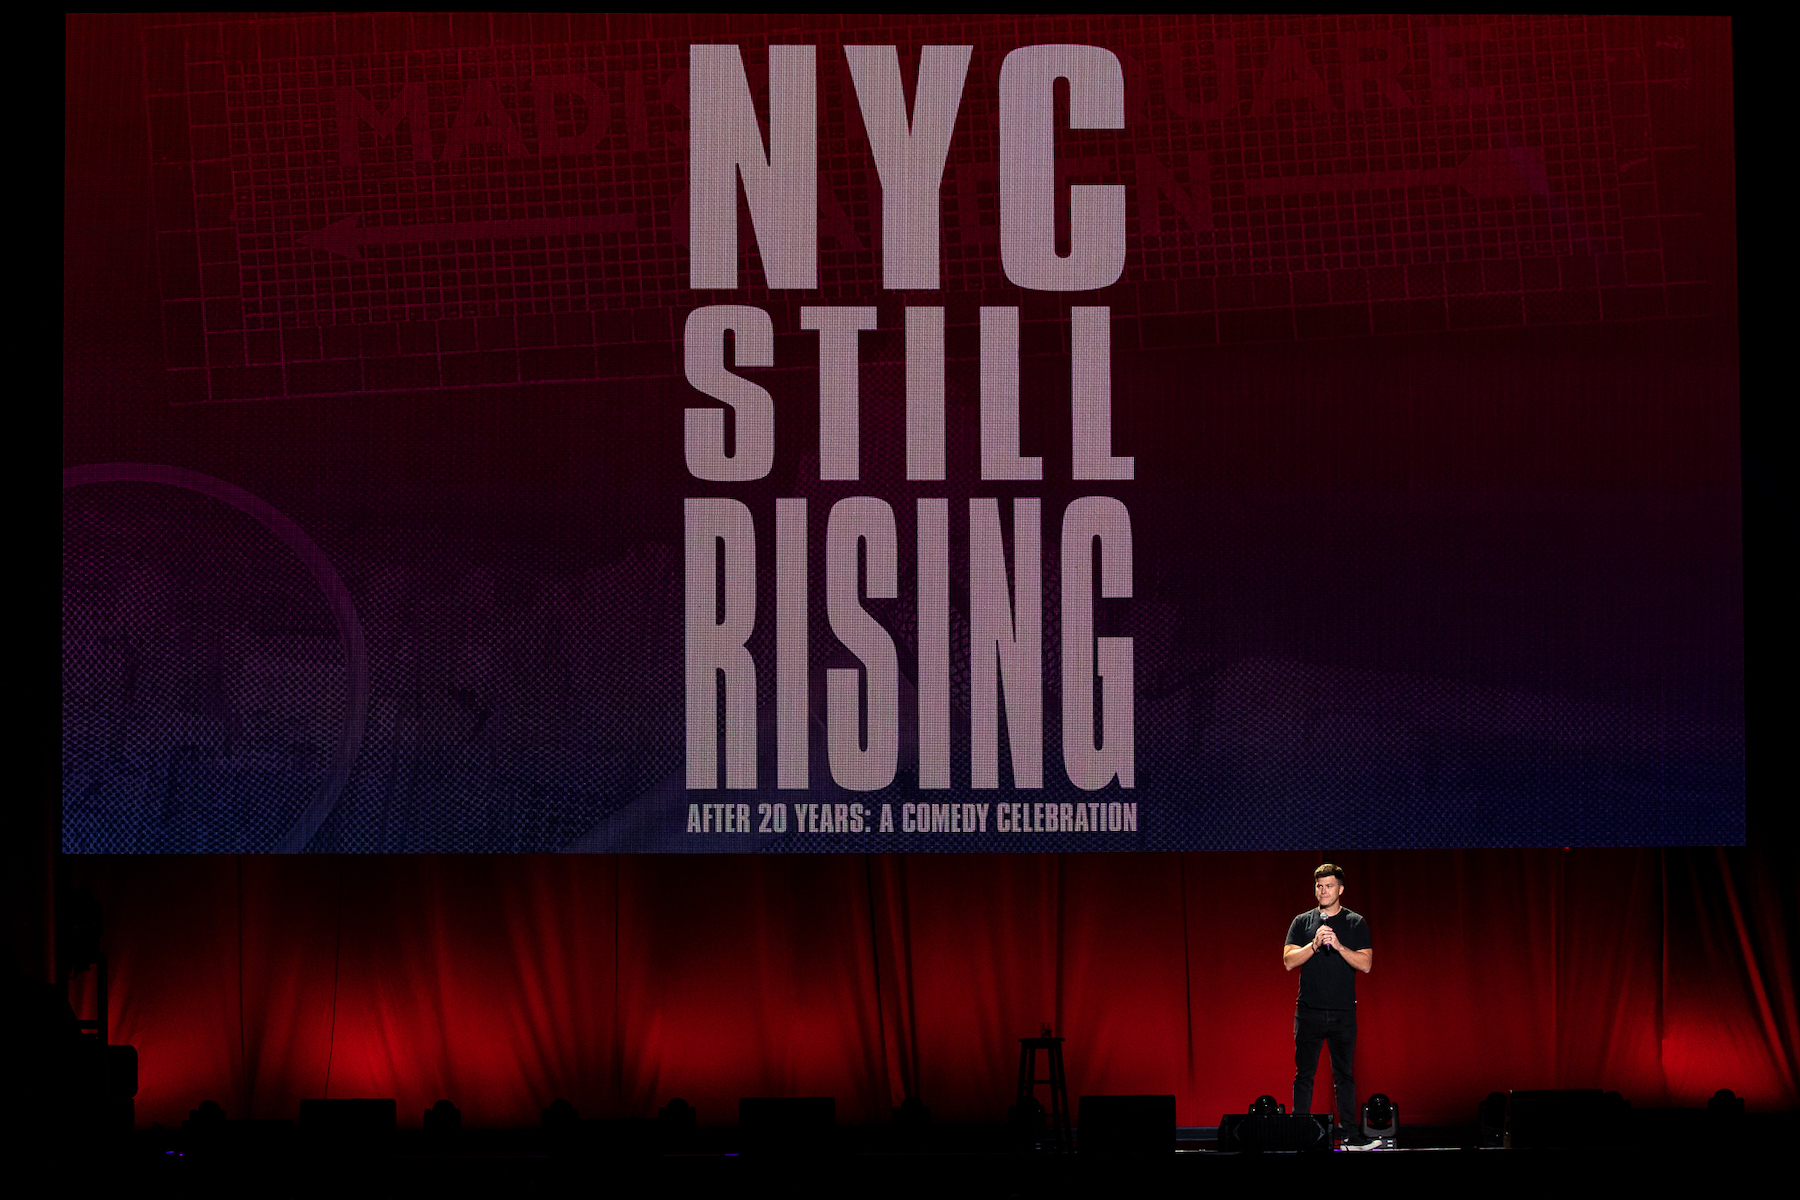 Photo 8 in 'NYC STILL RISING After 20 years:  A Comedy Celebration' gallery showcasing lighting design by Mike Baldassari of Mike-O-Matic Industries LLC